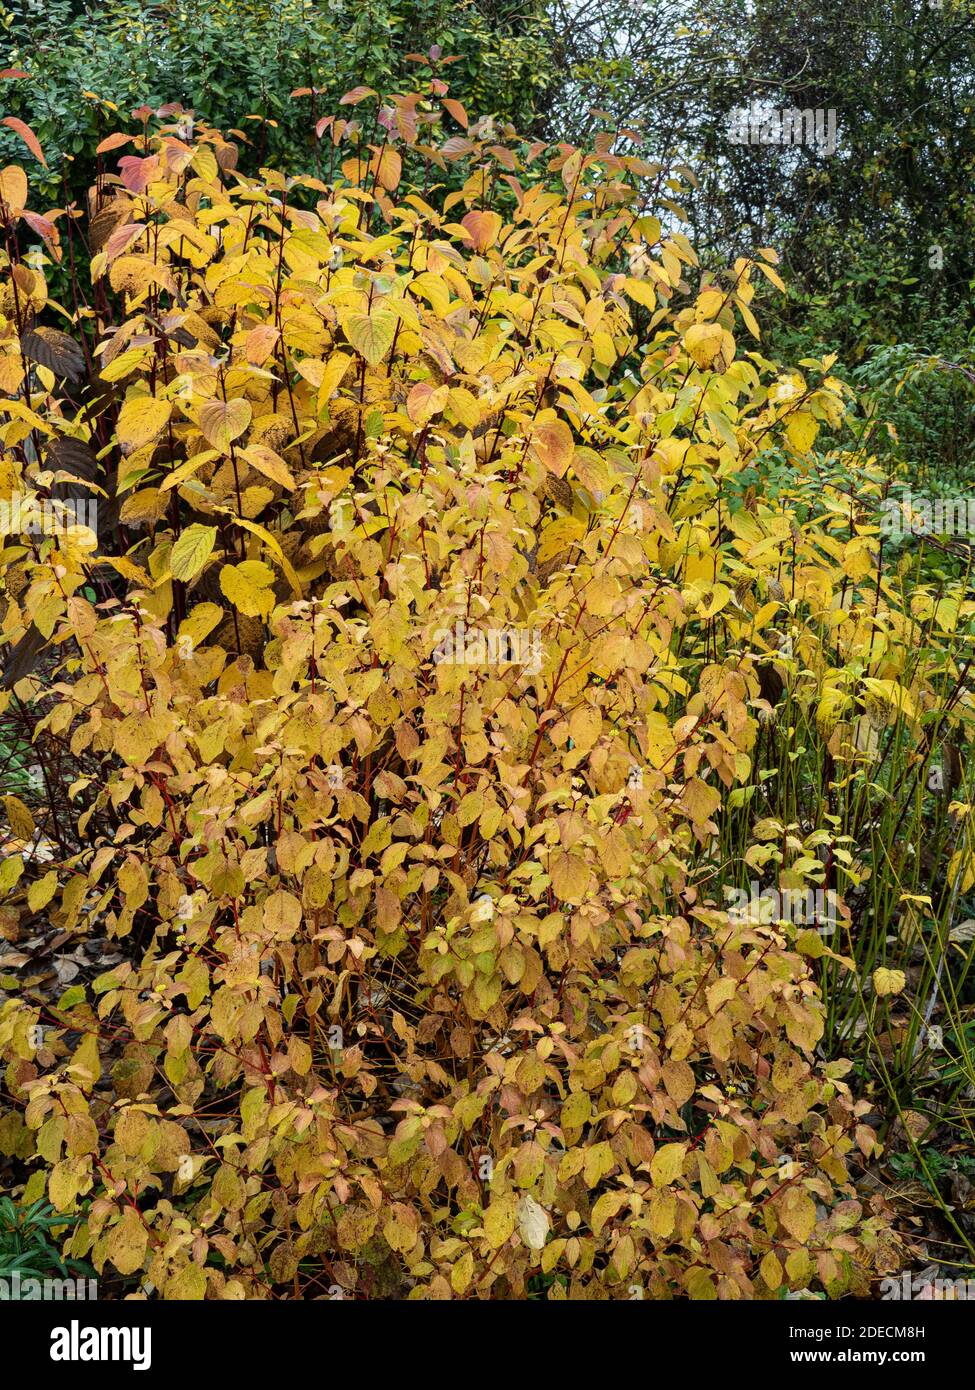 A group of dogwood bushes showing spectacular golden autumn colour Stock Photo